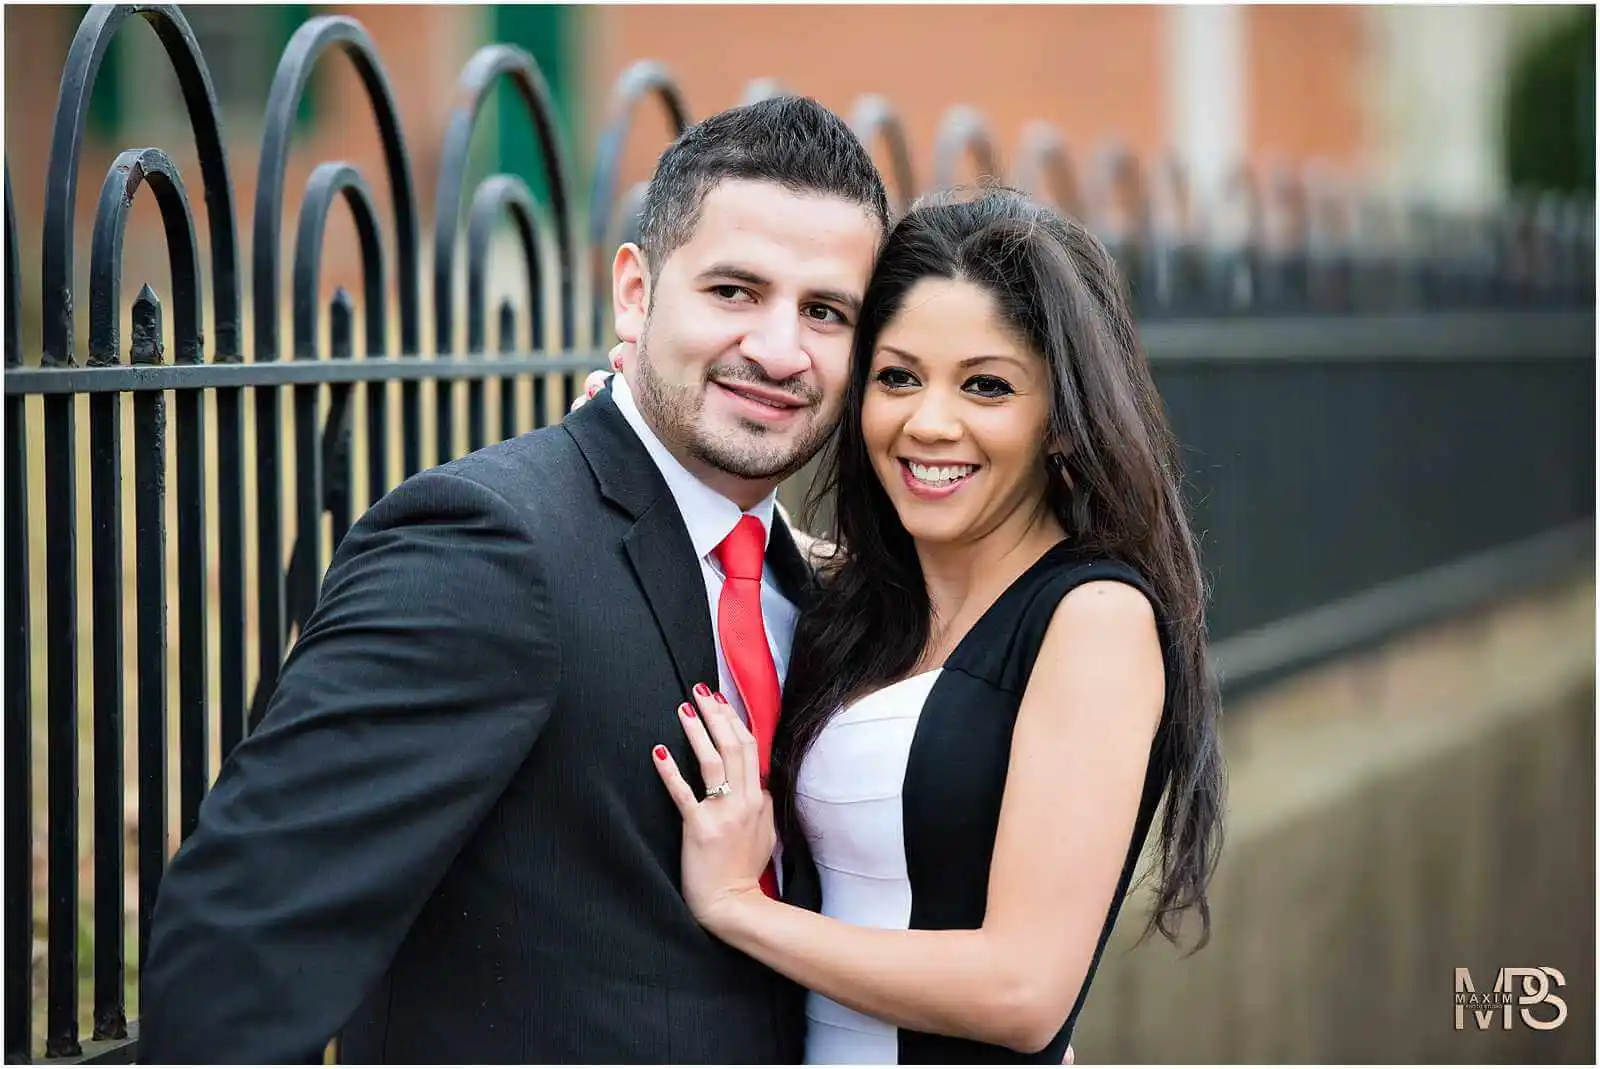 Elegant couple in portrait session smiling outdoors.